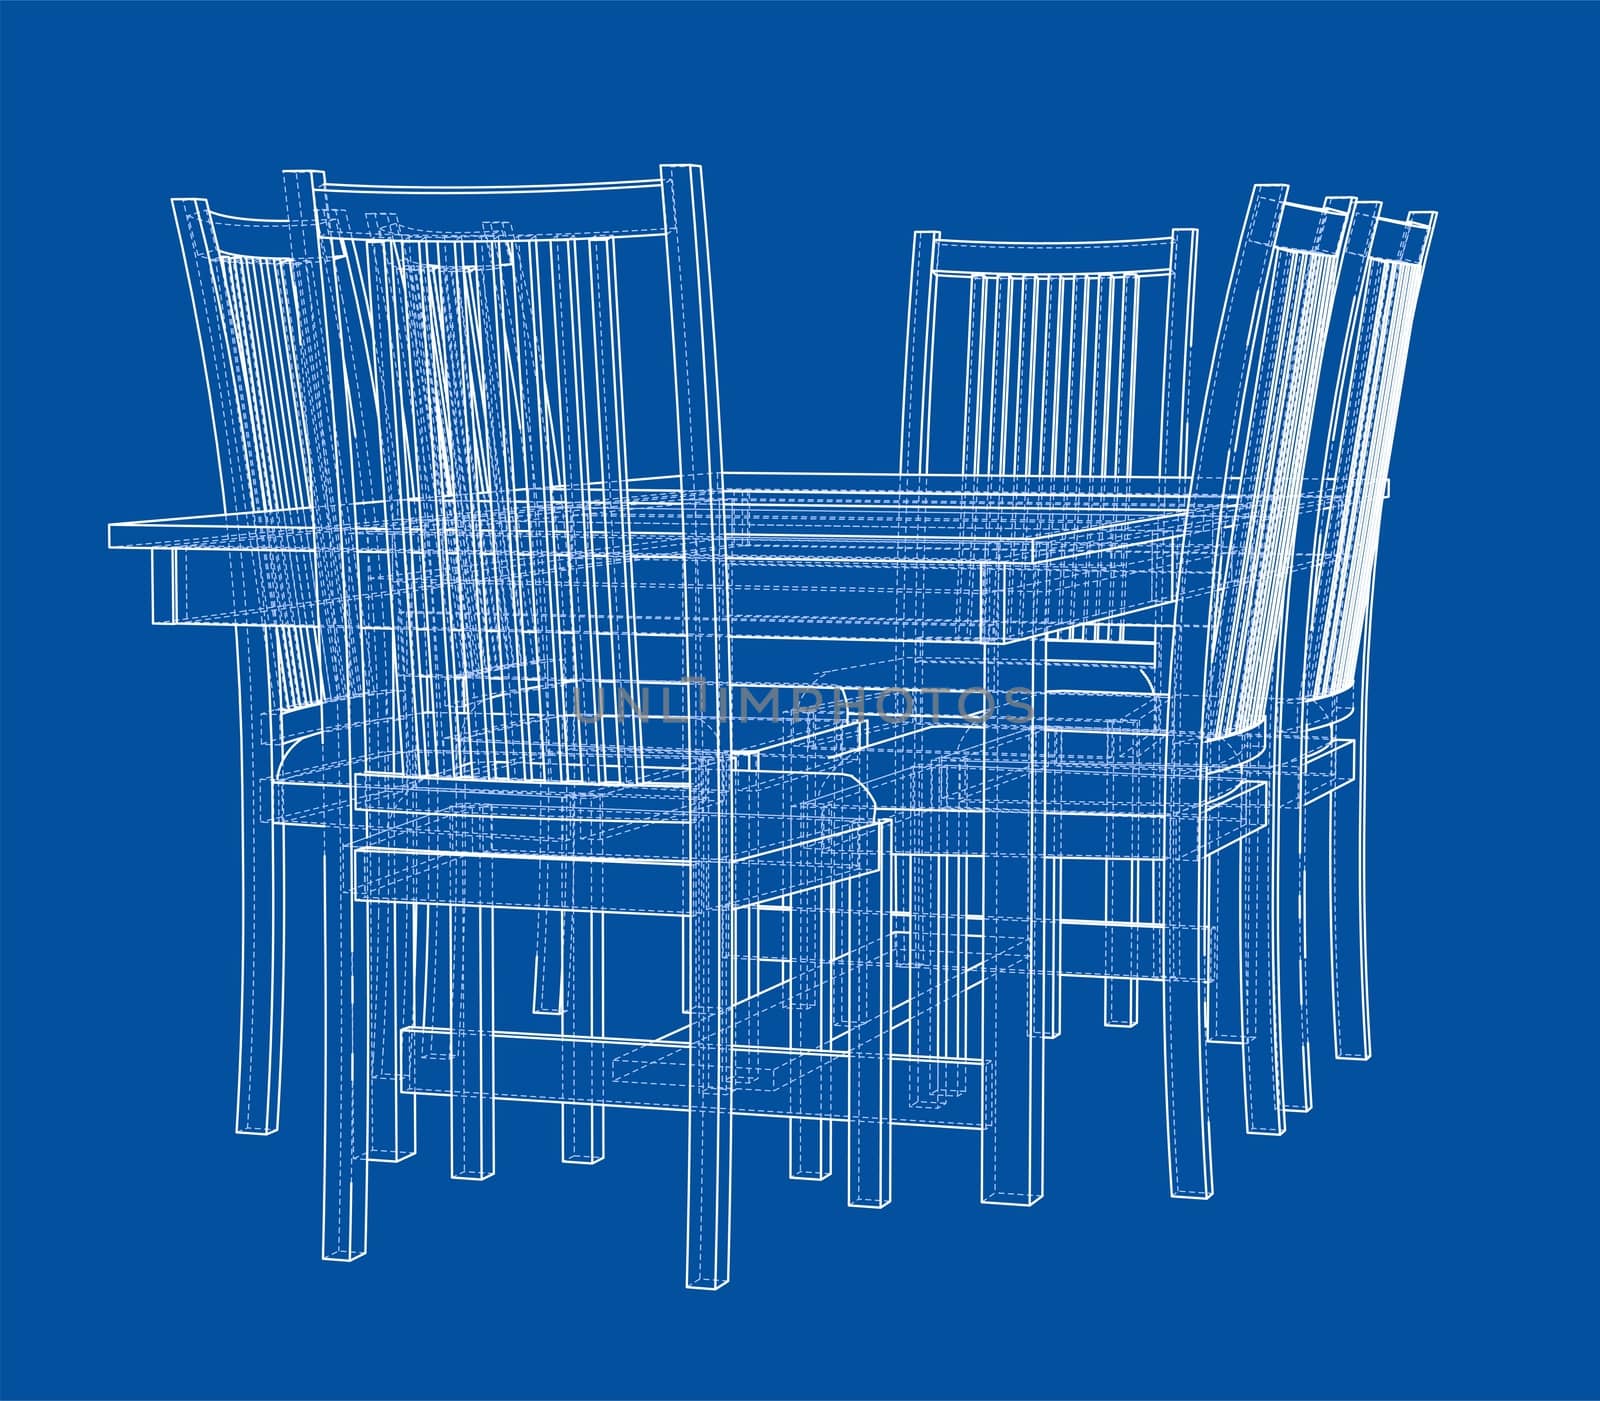 Dinner table with chairs. 3d illustration. Wire-frame style